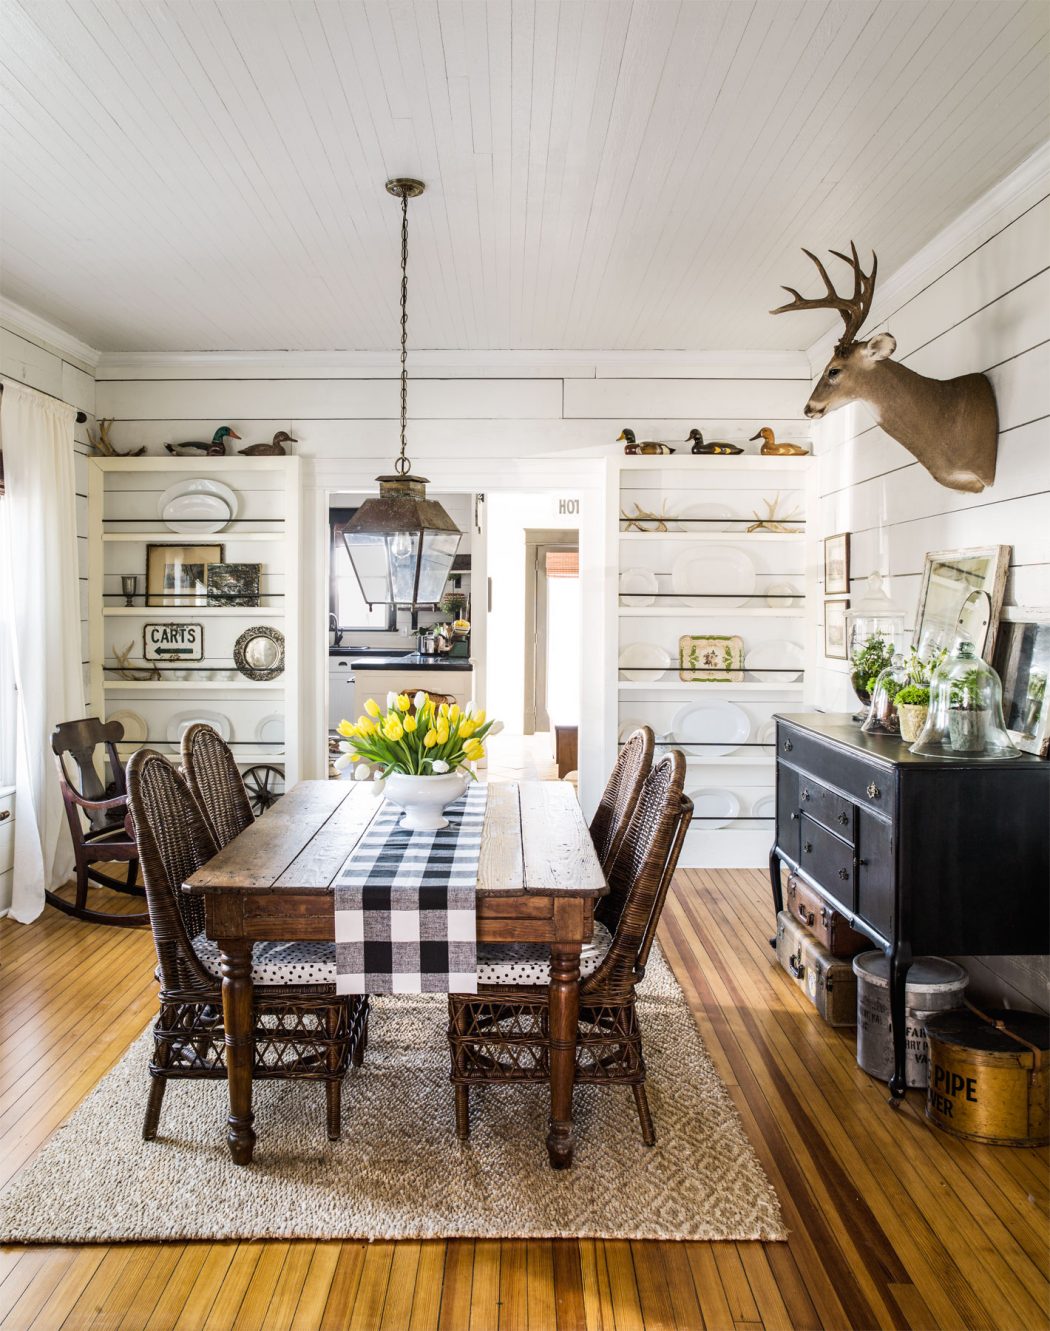 Dine like you are in a farmhouse5 15+ Best Luxurious and Modern Dining Room Design - 25